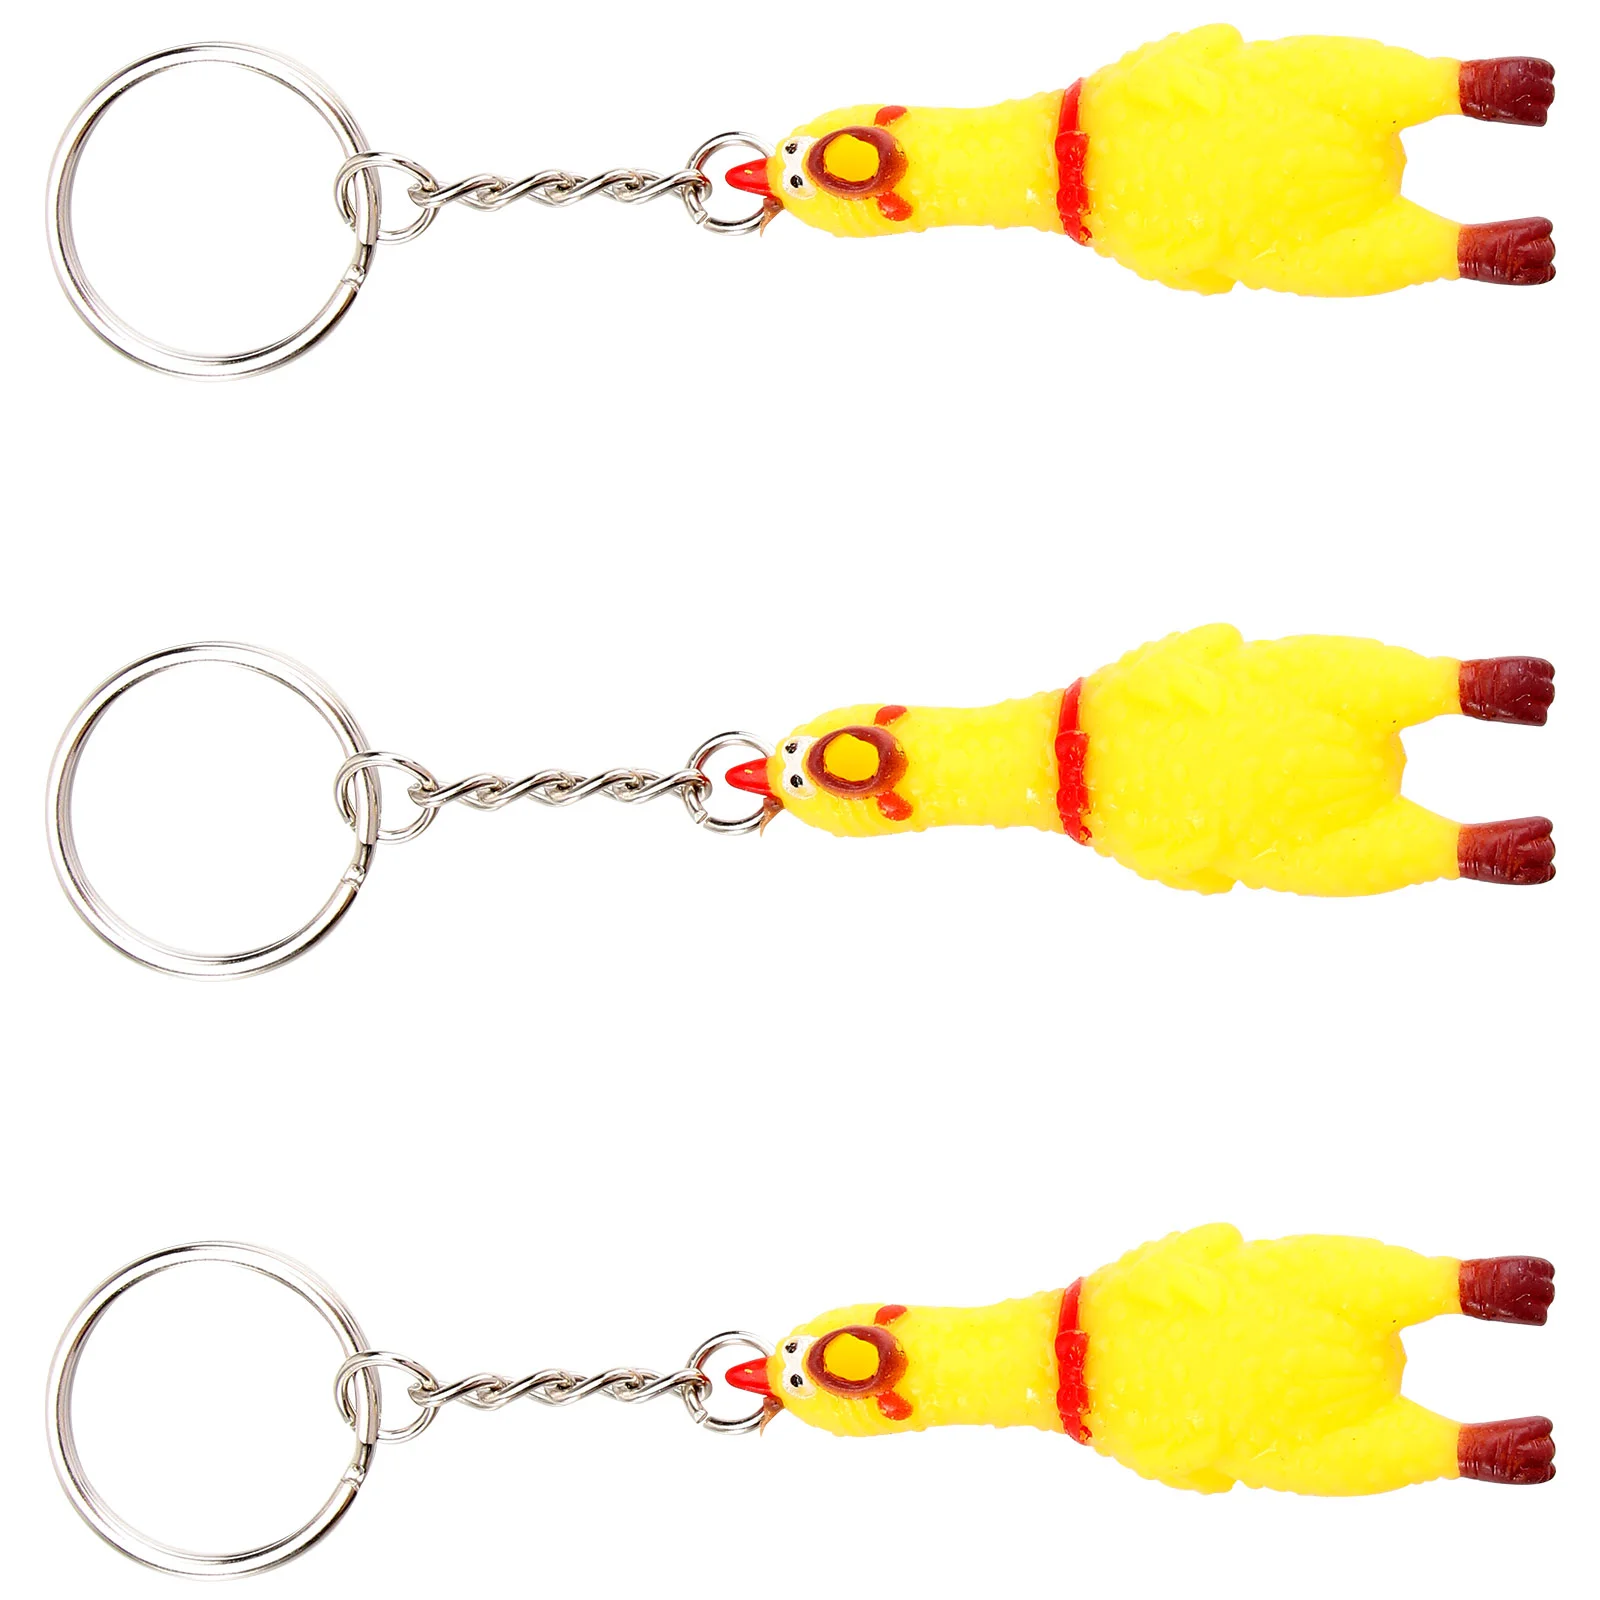 

Chicken Keychain Rubber Screamingsqueeze Key Pendantmini Charm Keychains Squeaking Dog Funny Lanyard Squeaky Chains Animal Bag